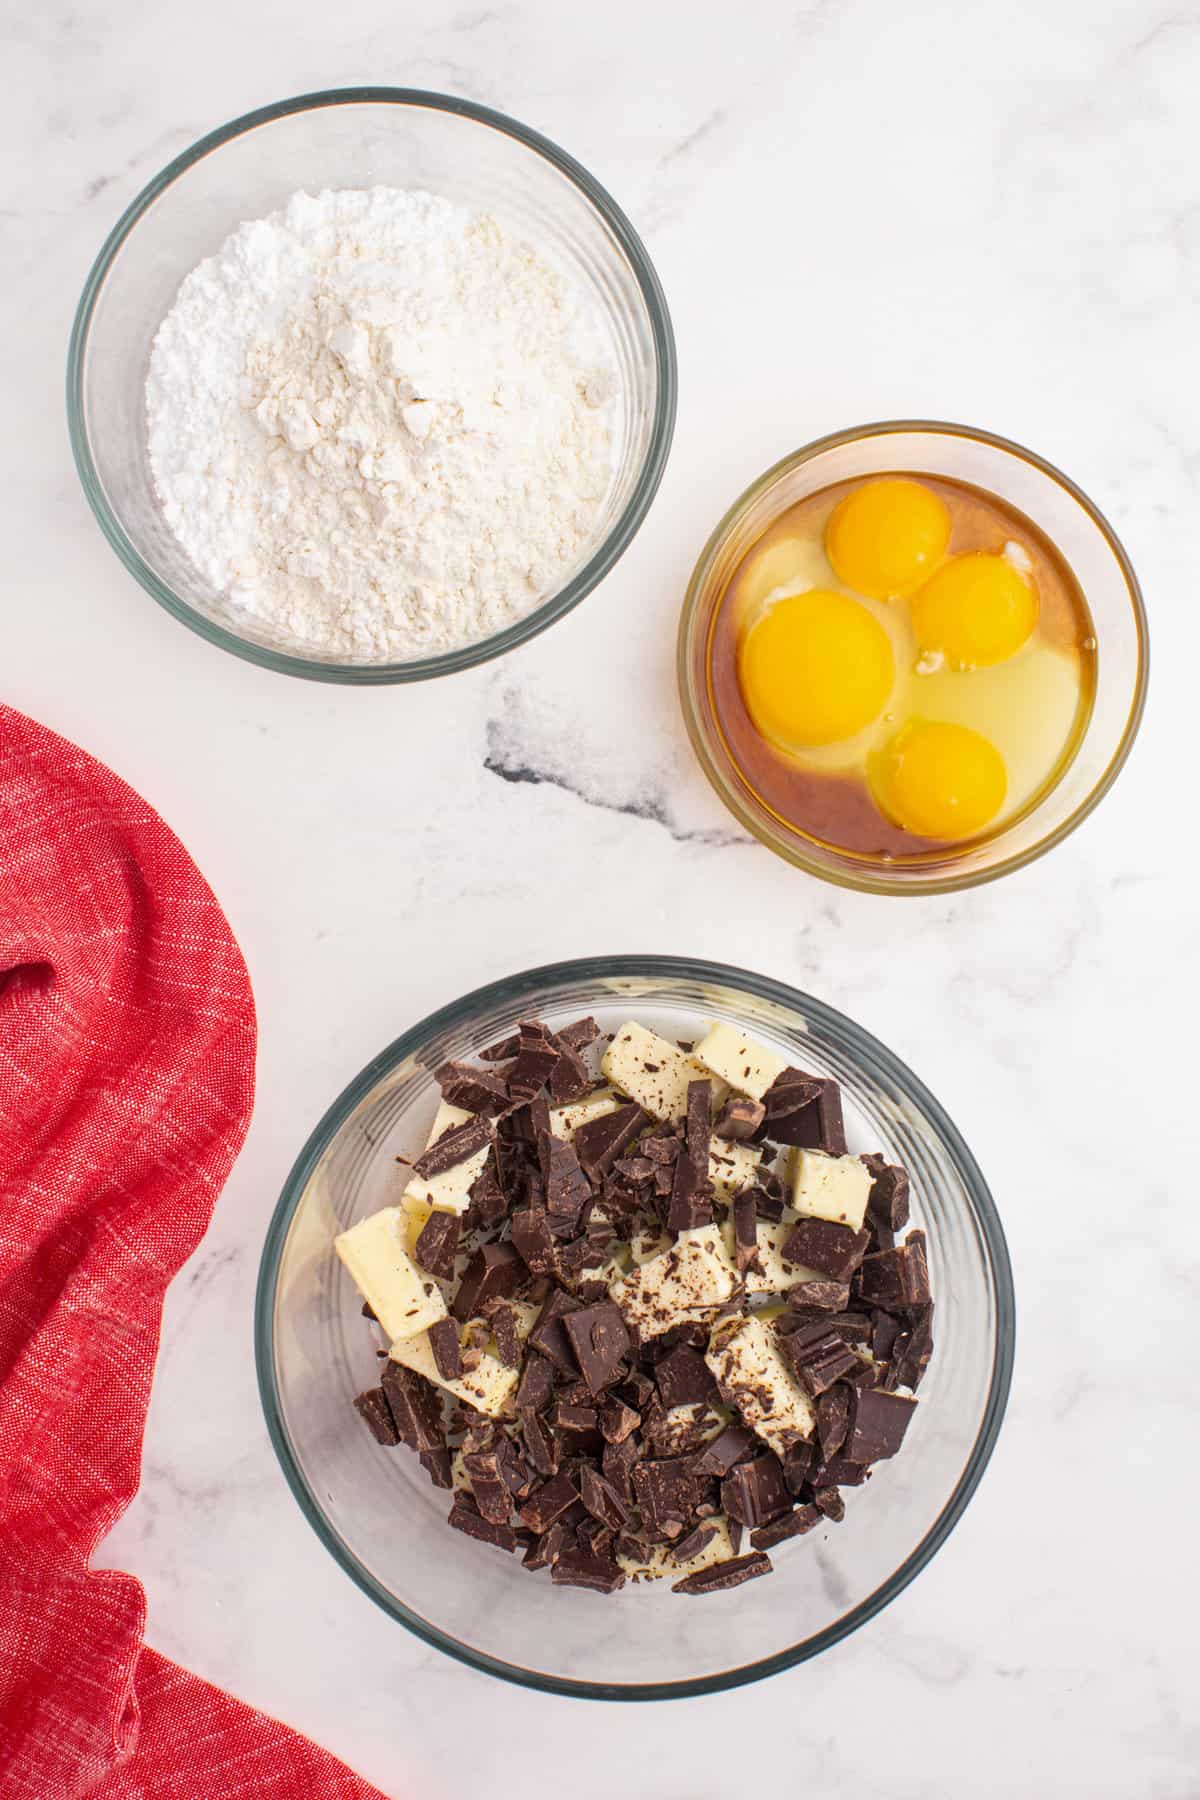 Bowl with butter and chocolate bars